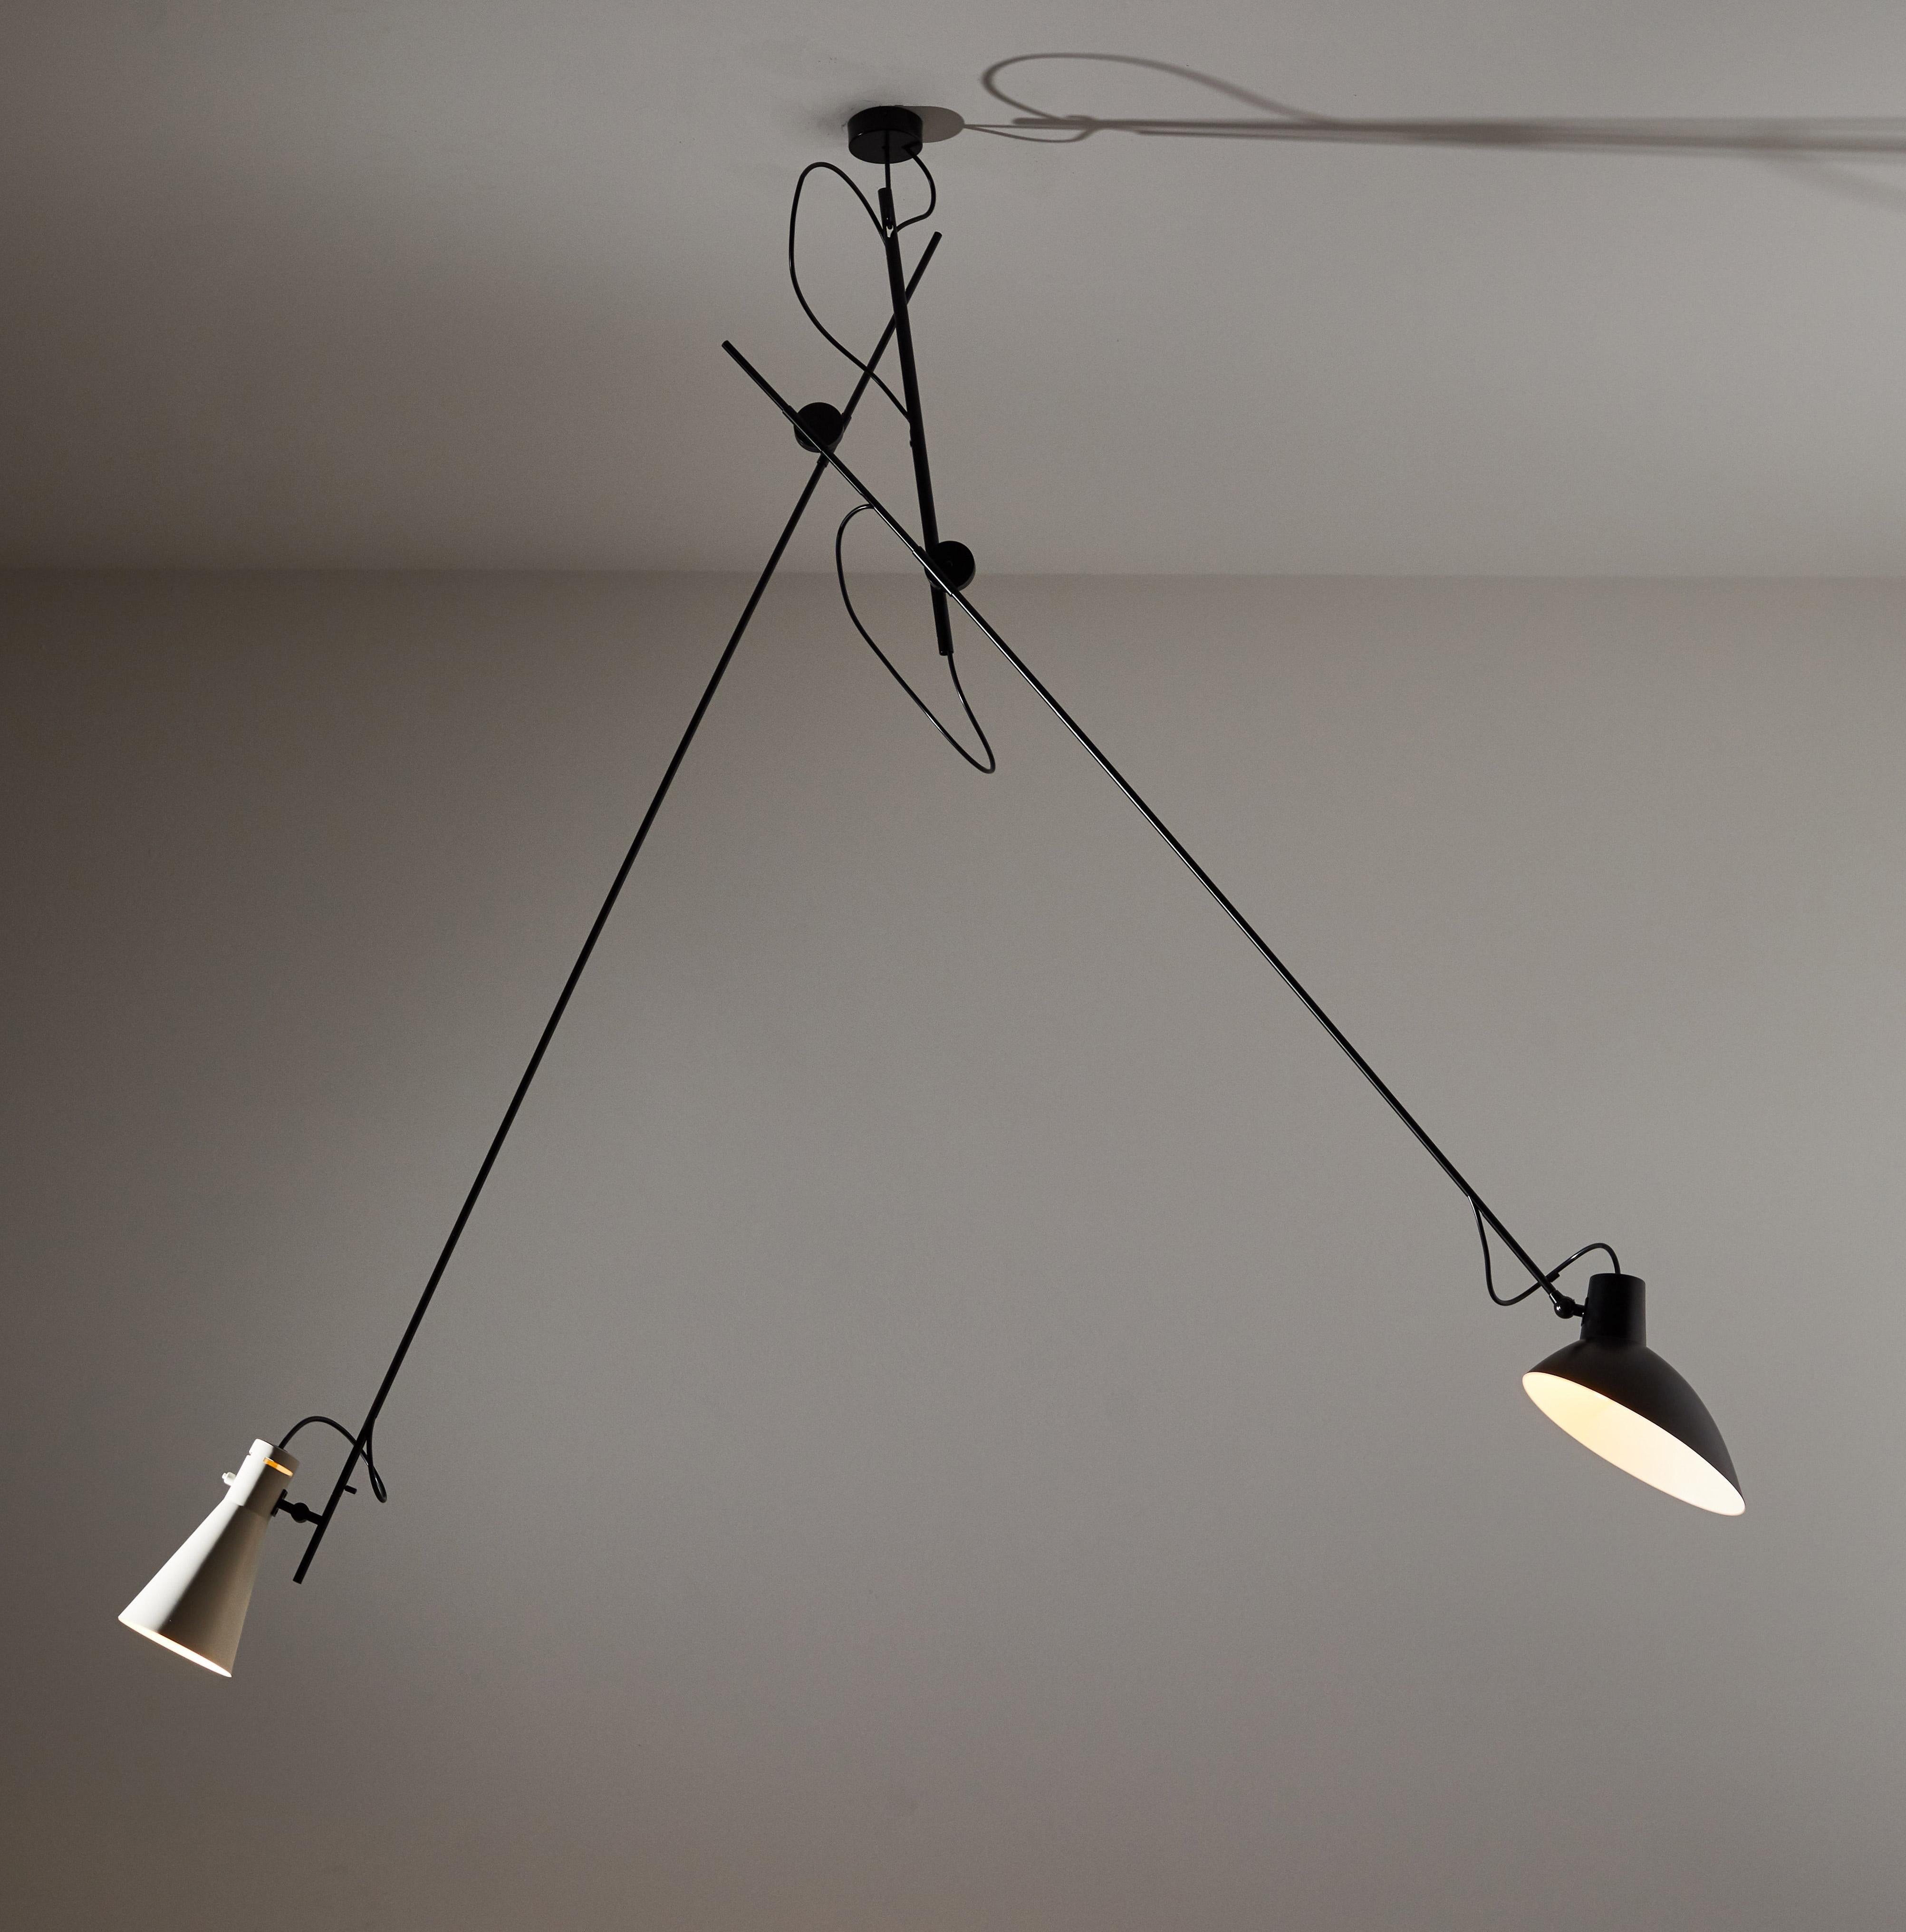 VV Cinquanta suspension light by Vittoriano Viganó. Originally designed in Italy, 1951. This light is a current production with an 8-10 week lead time. Spun aluminum reflectors, enameled steel structure. Reflectors and arms adjust to various